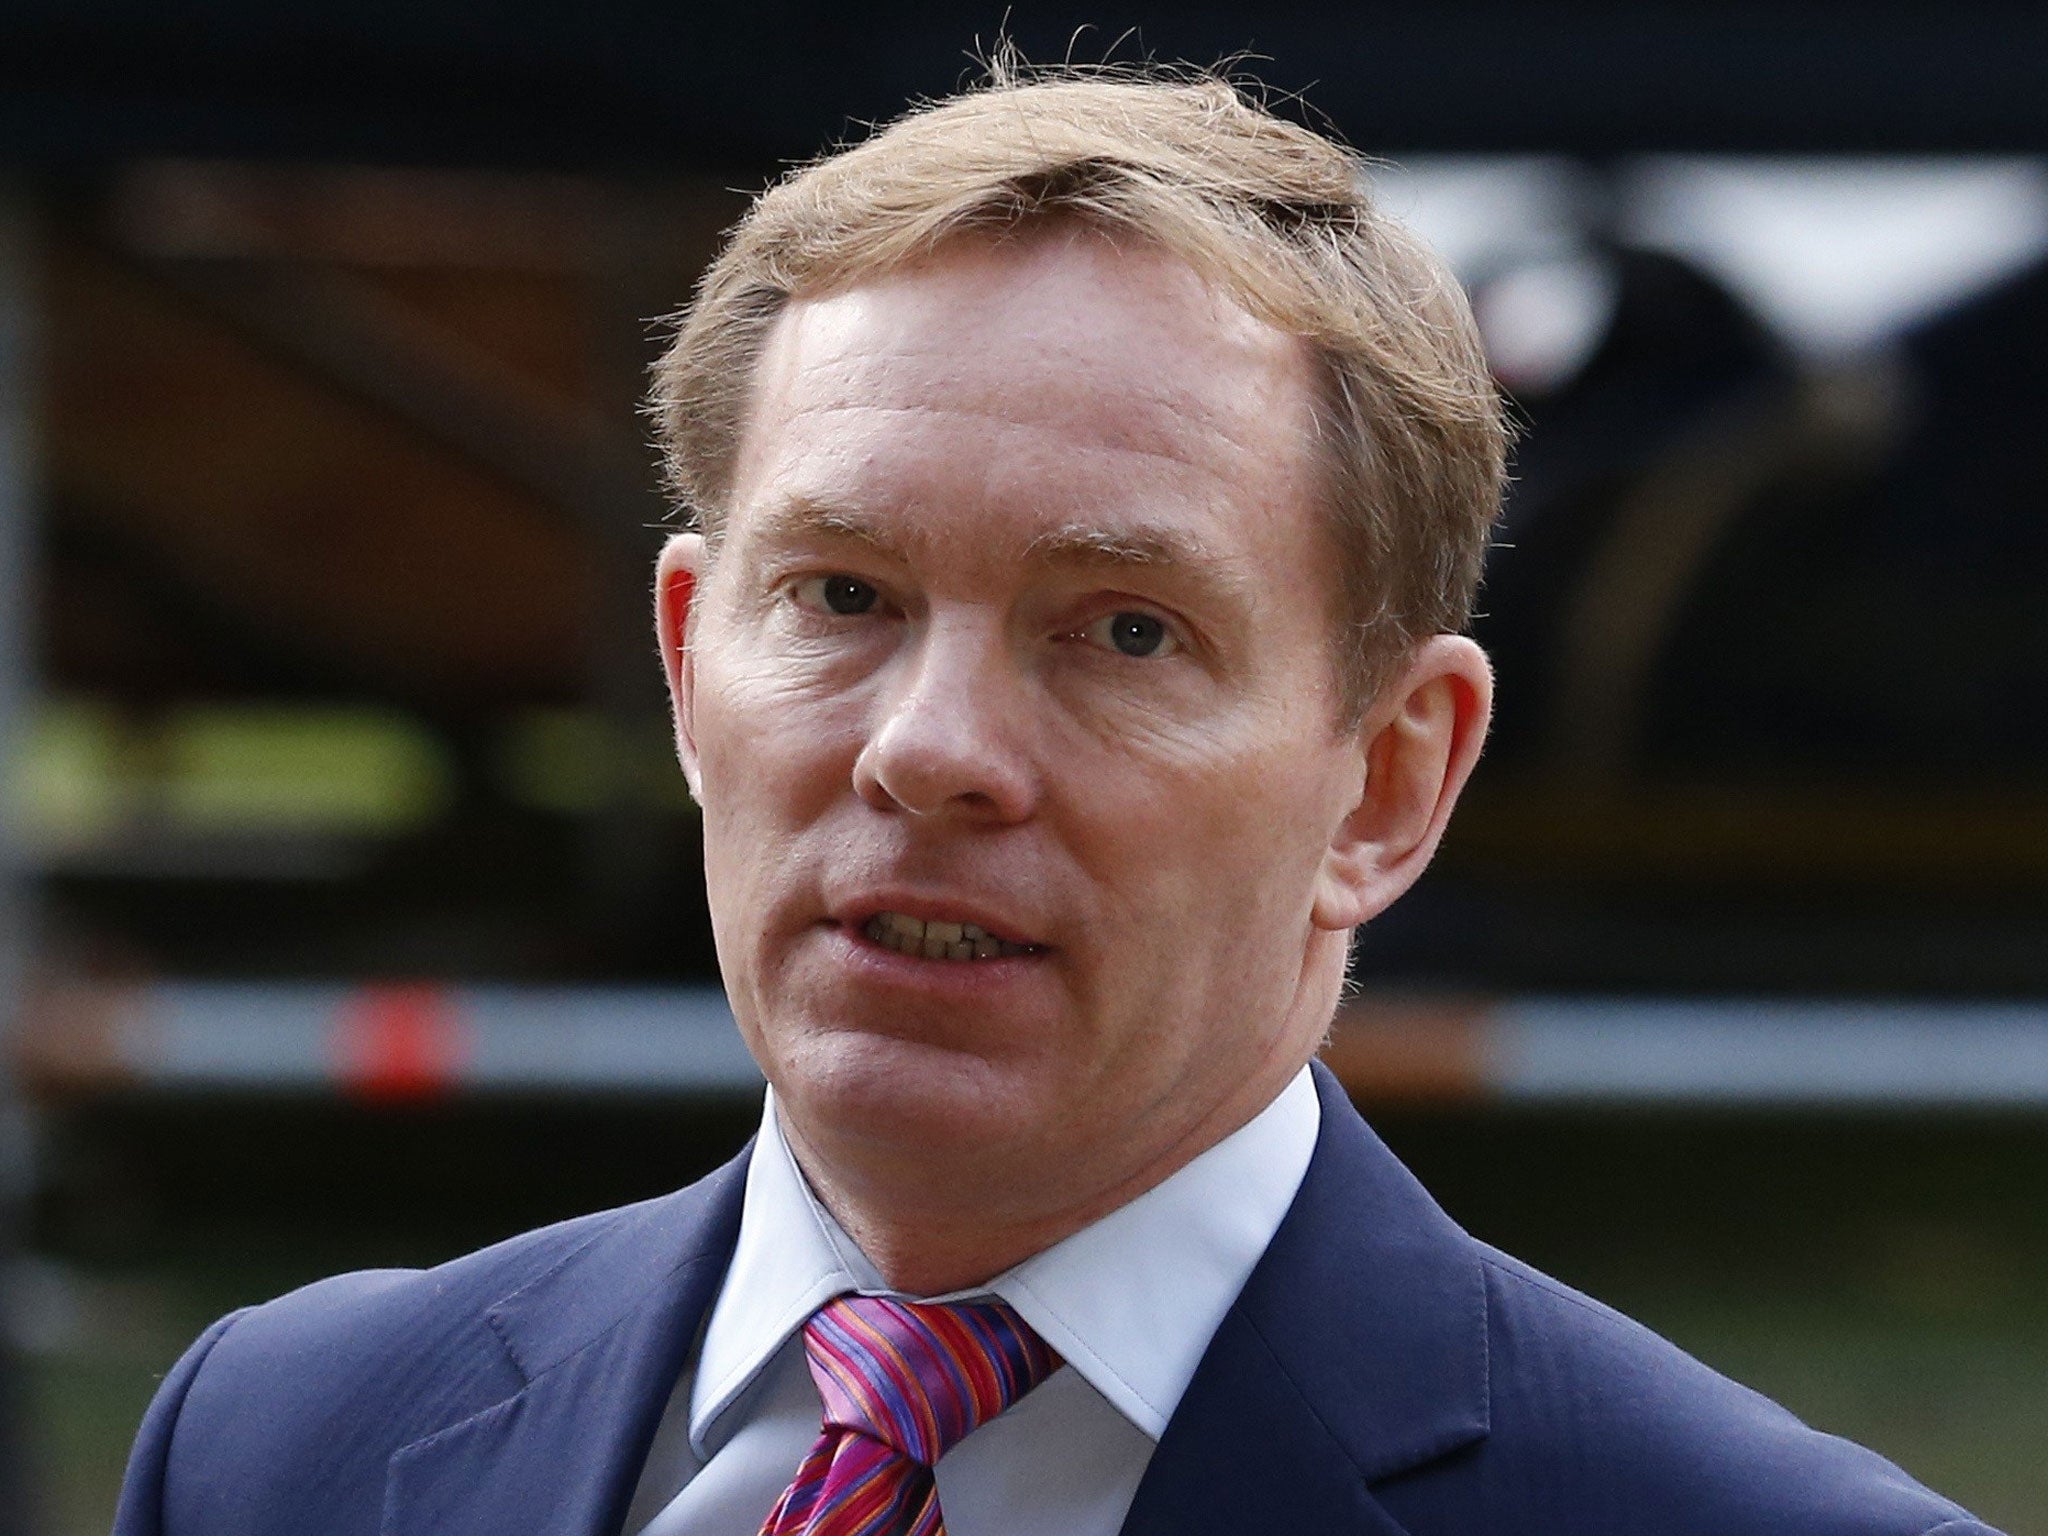 Chris Bryant resignation letter warns Corbyn will be 'man who broke the  Labour Party', The Independent